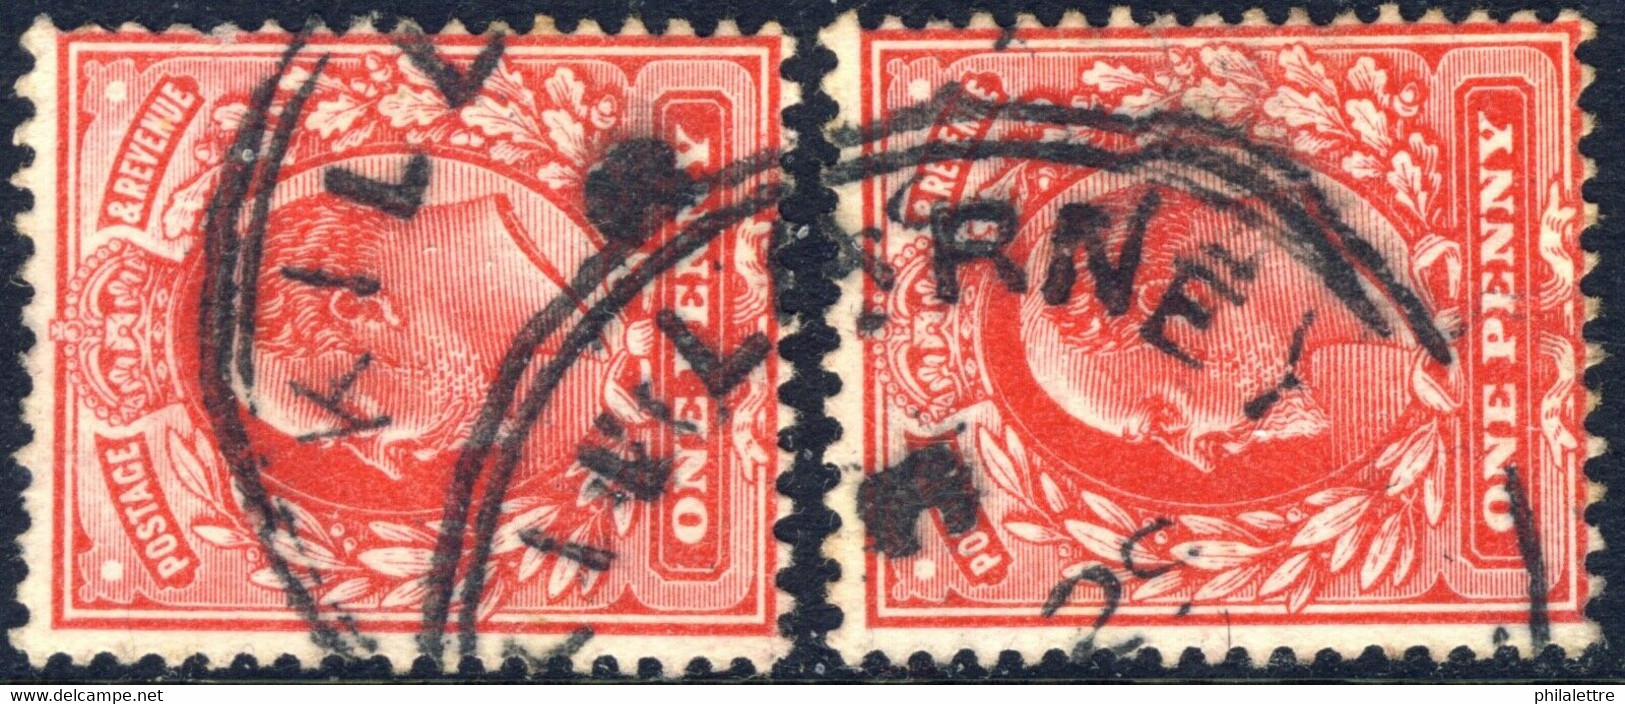 KEVII 2xSG219 1d Scarlet Used "KILLARNEY" (Co. Kerry, Ireland) Rubber CDS - Usados